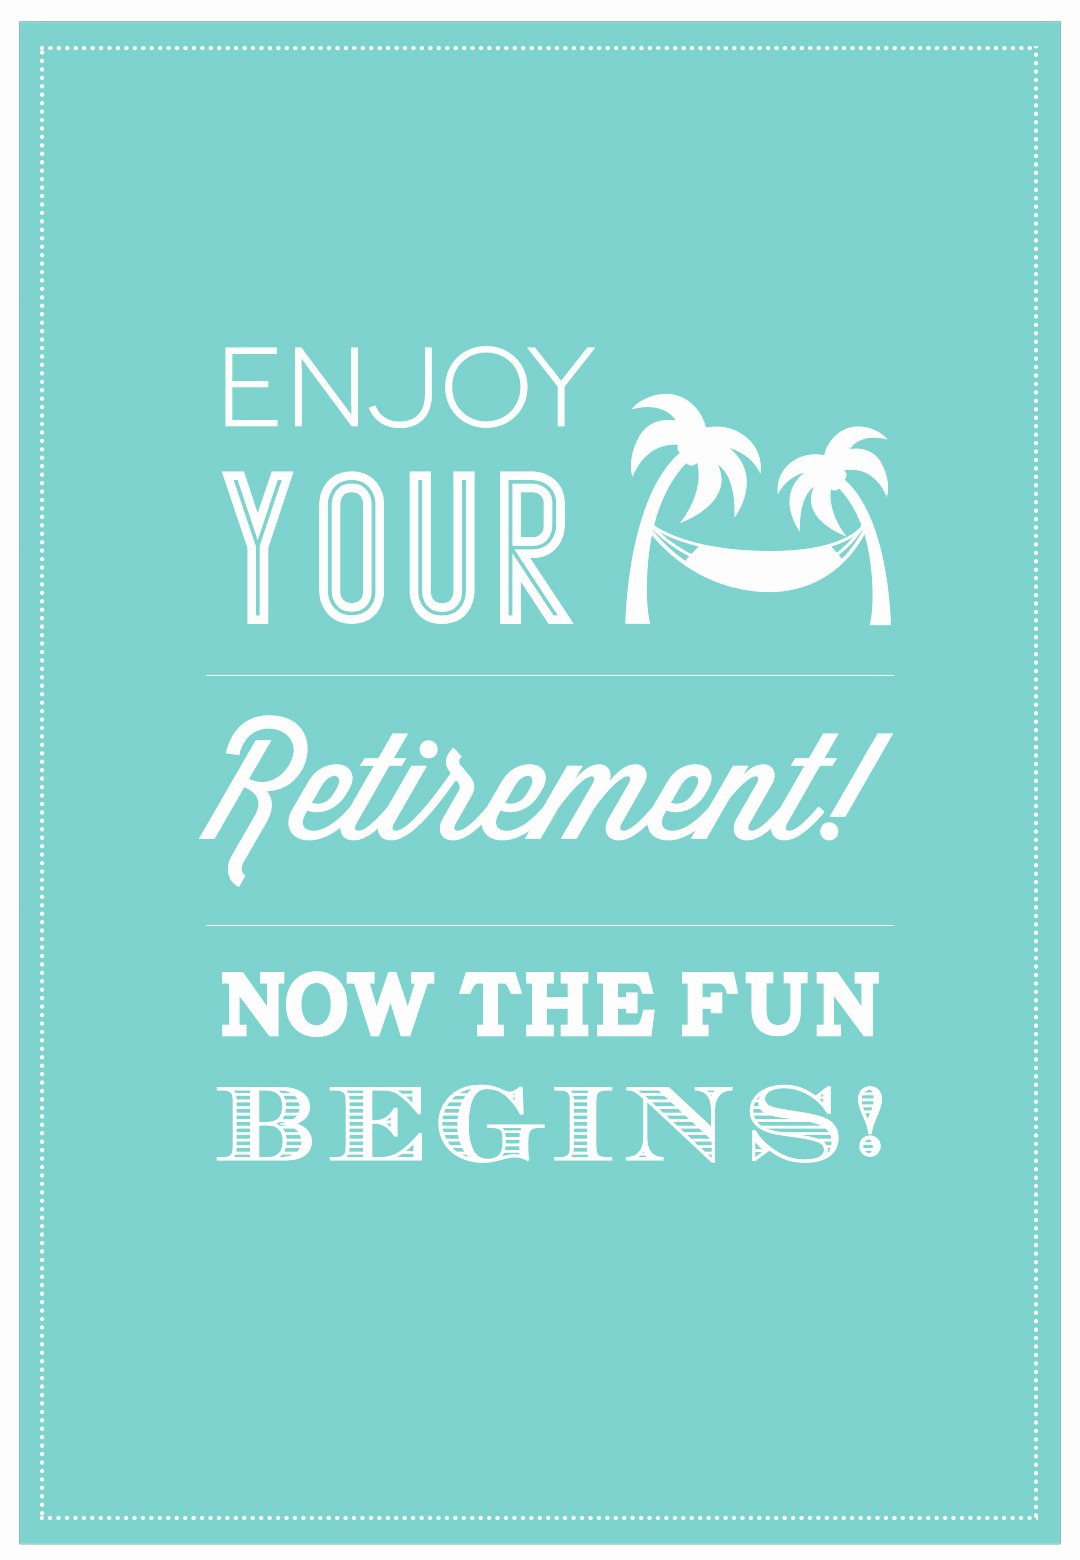 Free Printable Retirement Cards Lovely now the Fun Begins Retirement Card Free